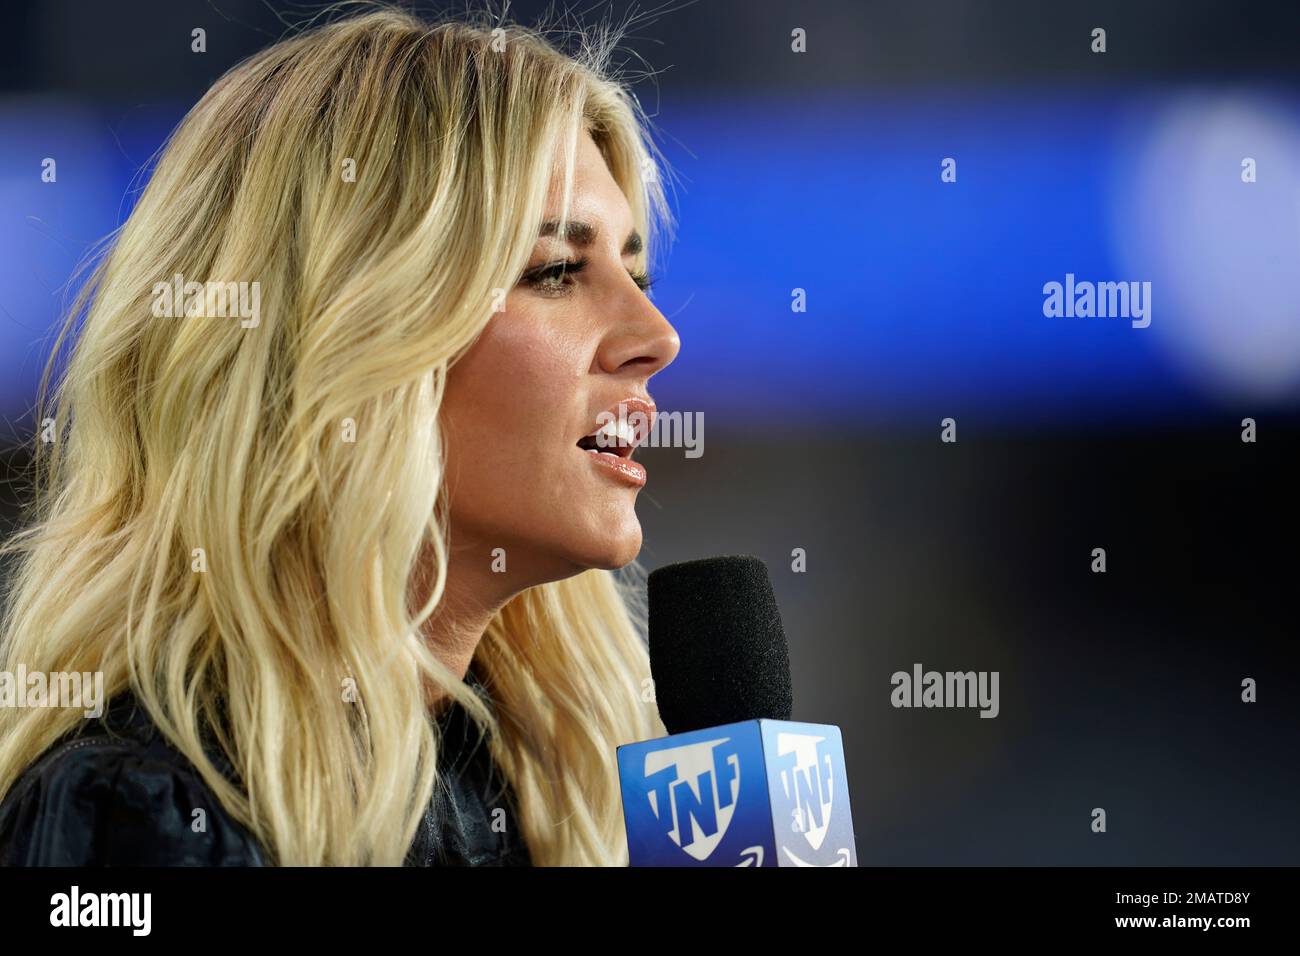 Reporter Charissa Thompson talks in the Amazon Prime Video broadcast booth before a preseason NFL football game between the Los Angeles Rams and the Houston Texans Friday, Aug